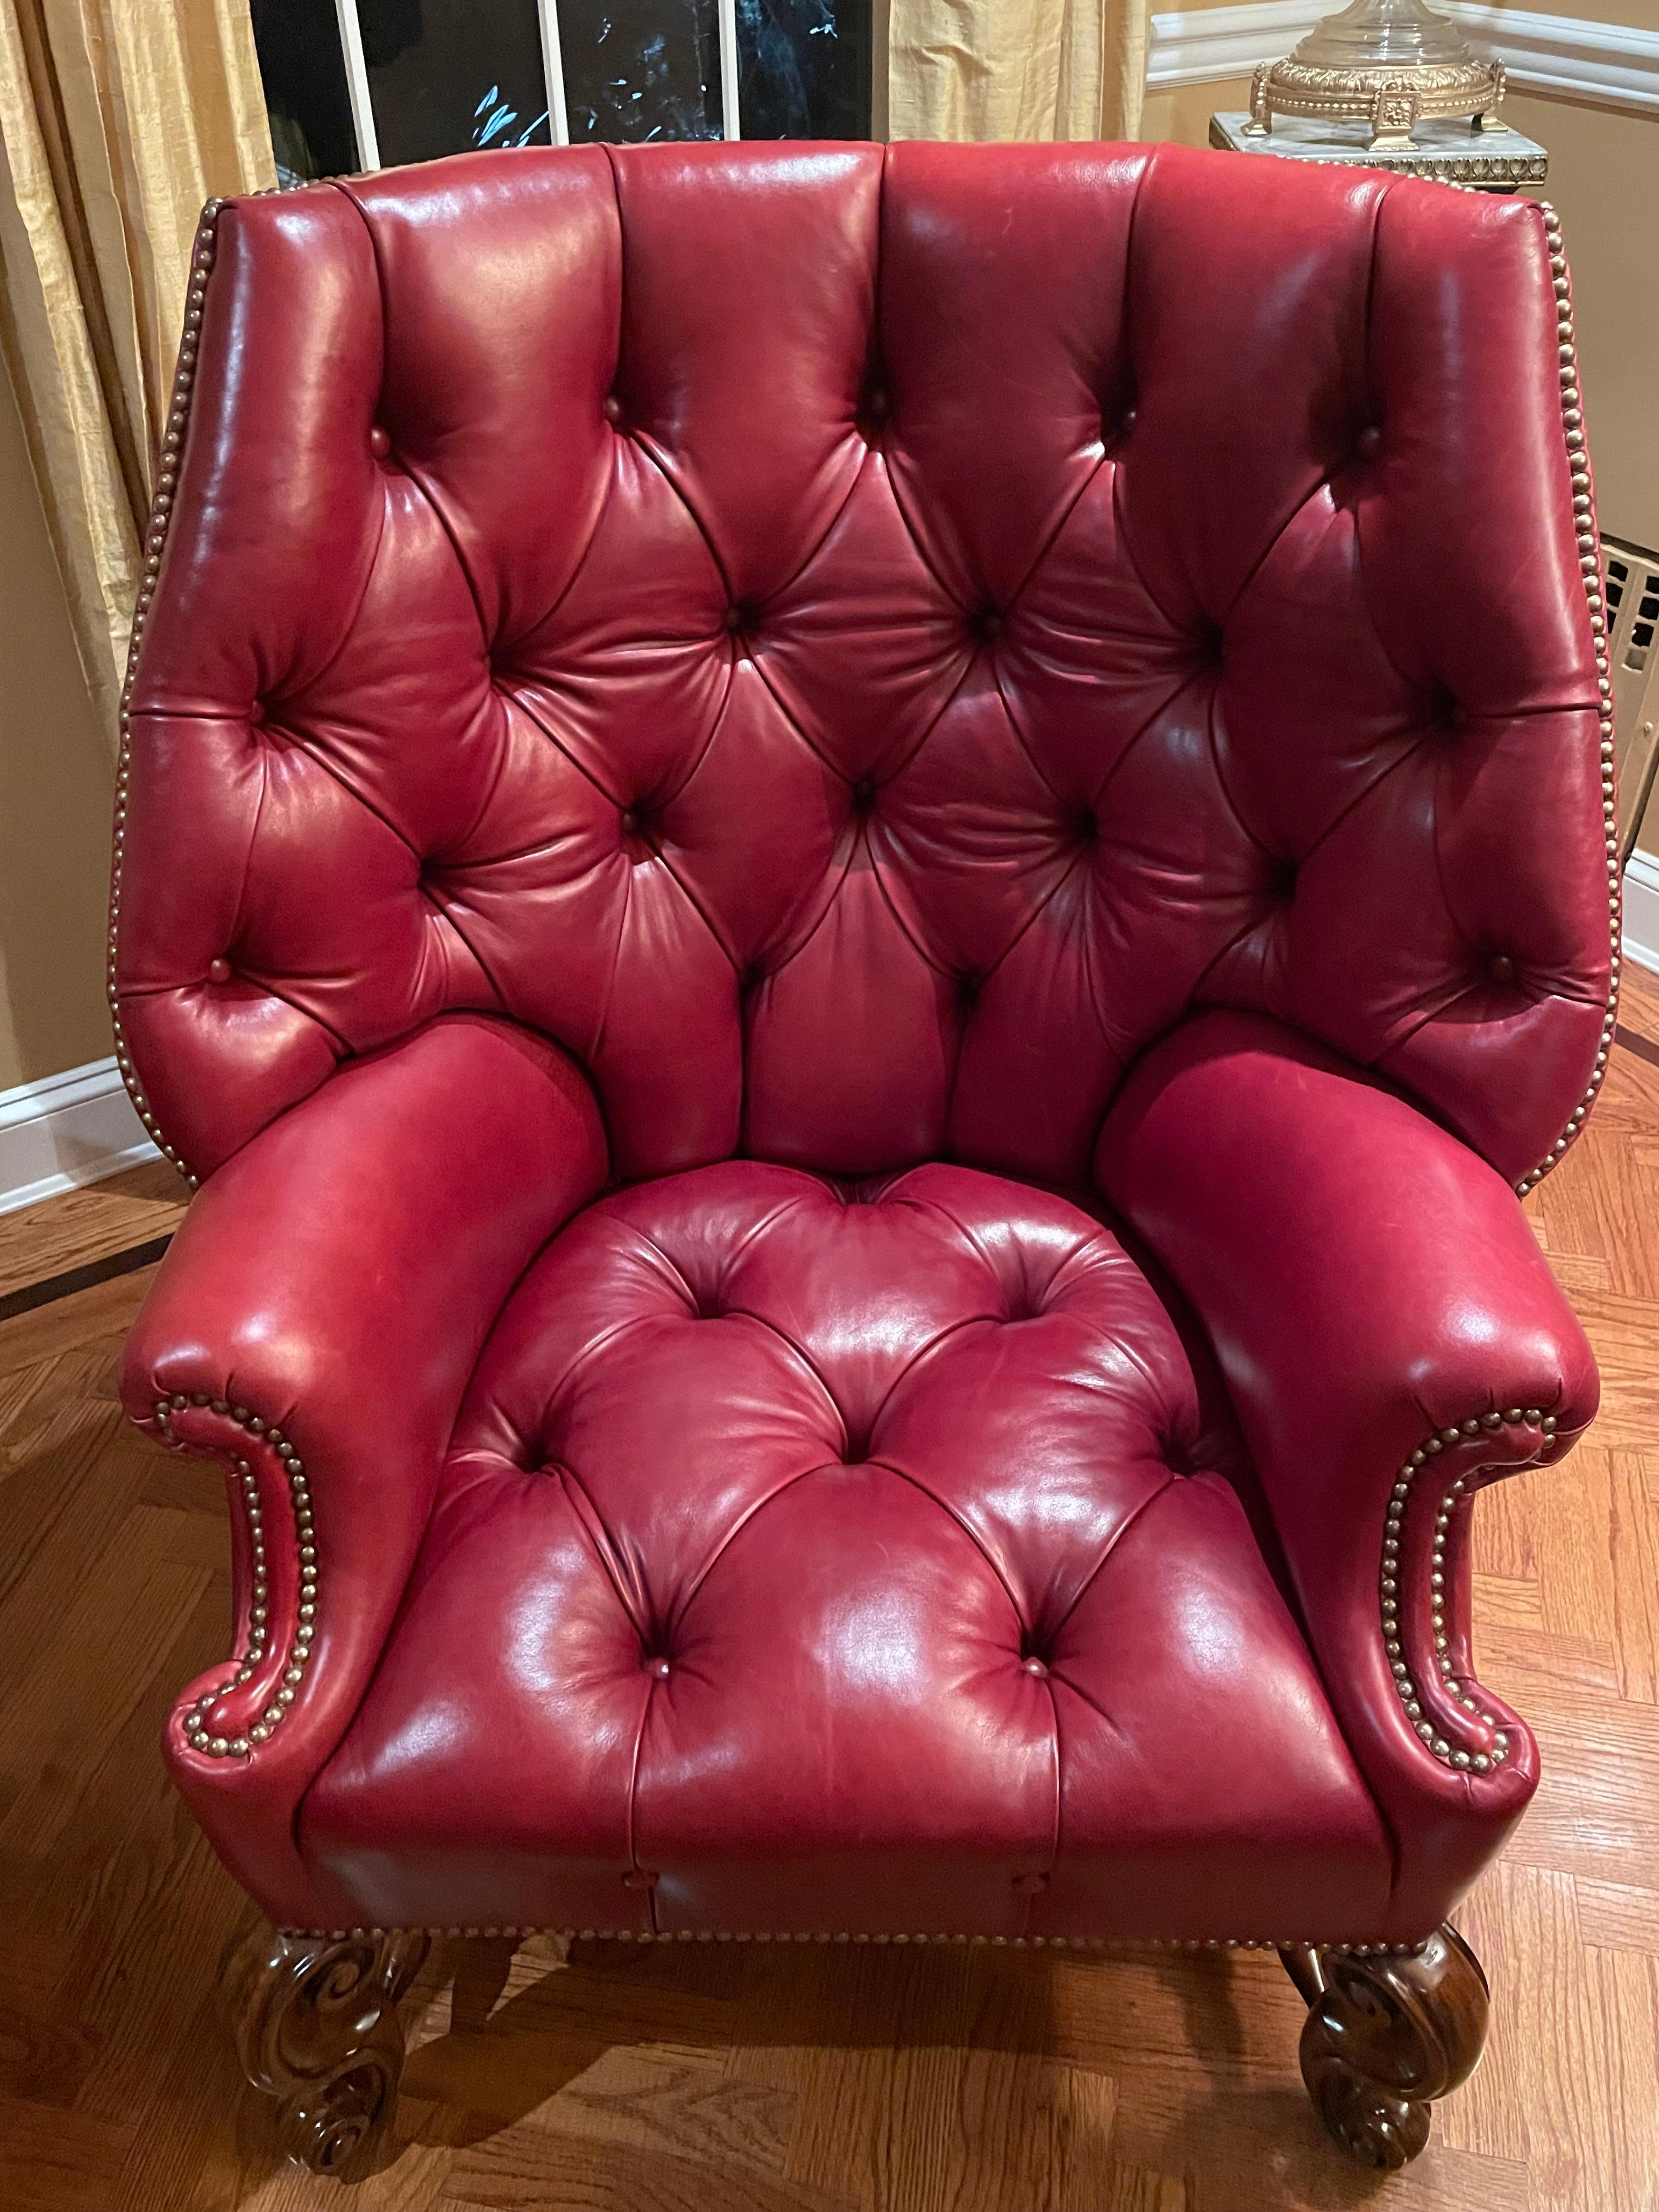 Pair of Oversized Tufted Leather Wingback Chairs, Georgian, Finest Quality For Sale 10